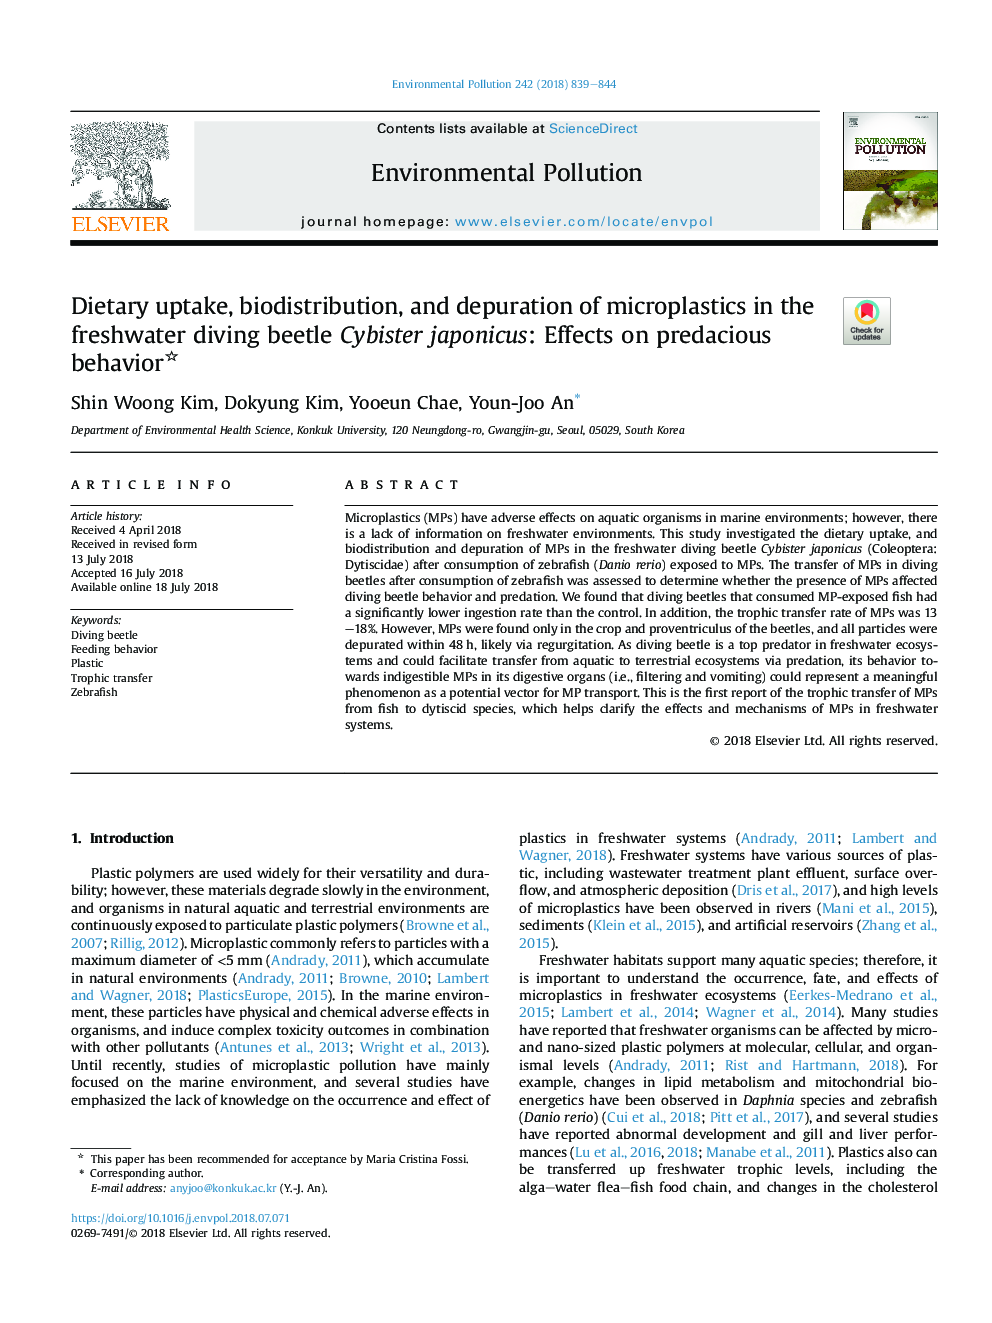 Dietary uptake, biodistribution, and depuration of microplastics in the freshwater diving beetle Cybister japonicus: Effects on predacious behavior